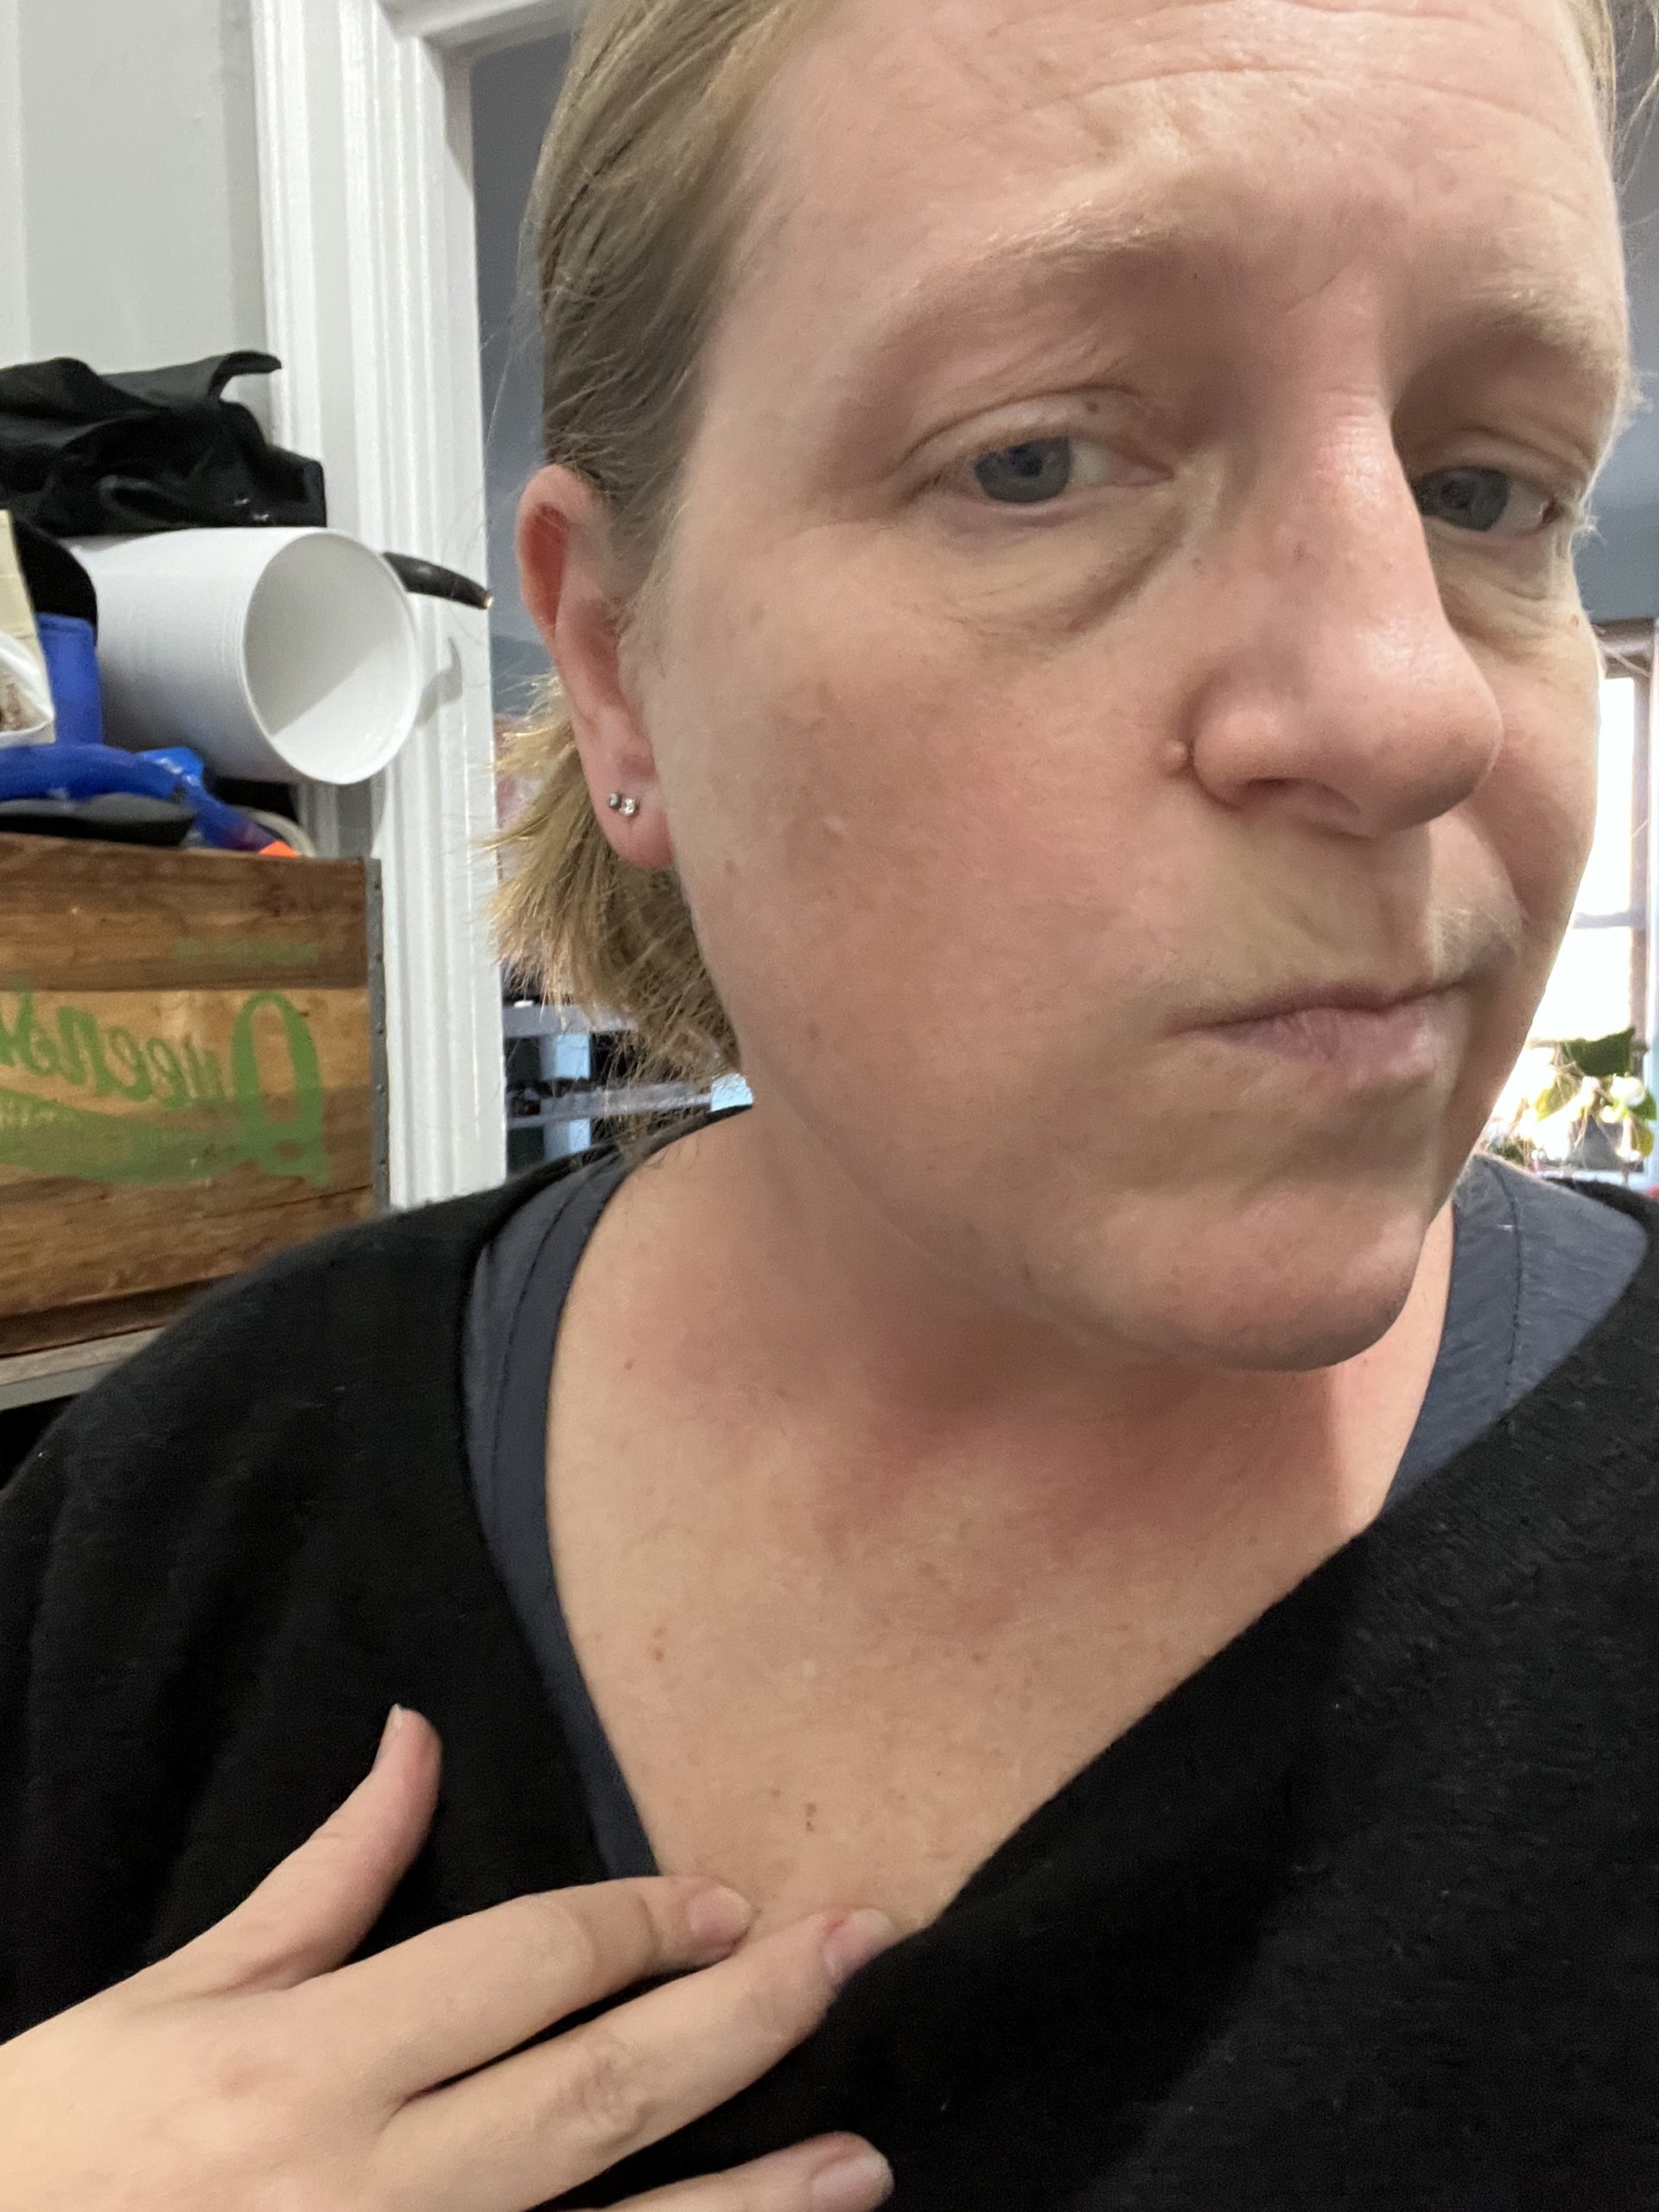 selfie of a middle-aged woman showing a rash on her neck